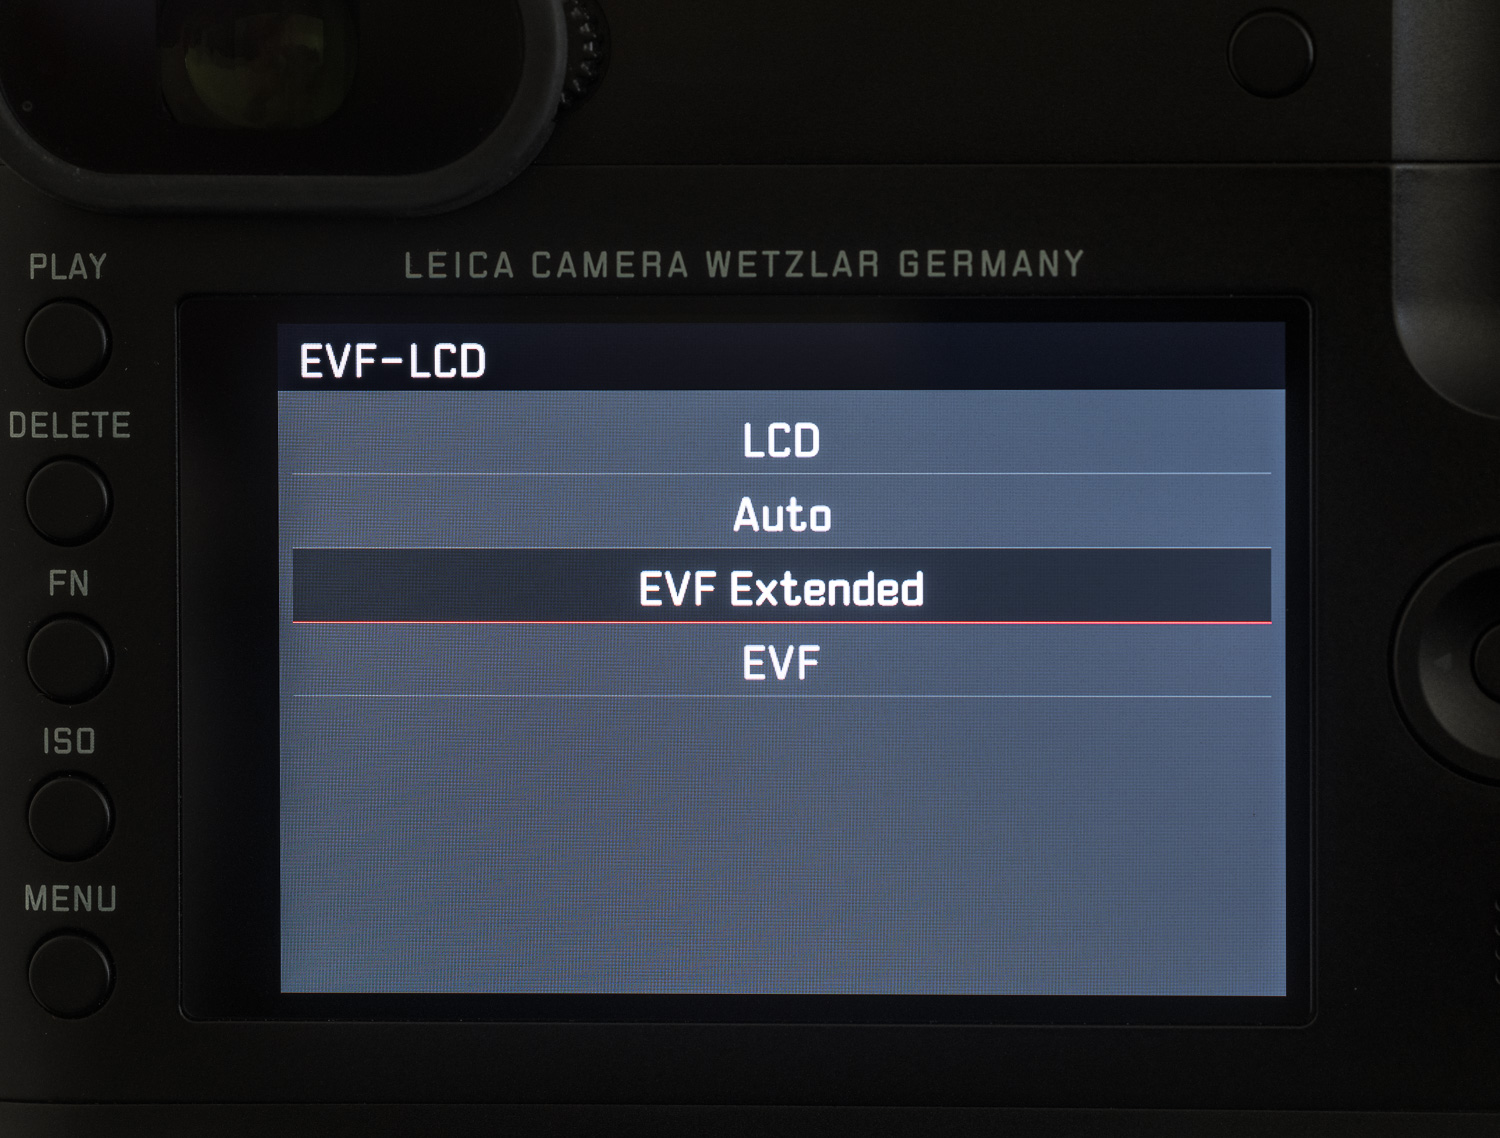 leica q firmware 2.0 evf extended mode